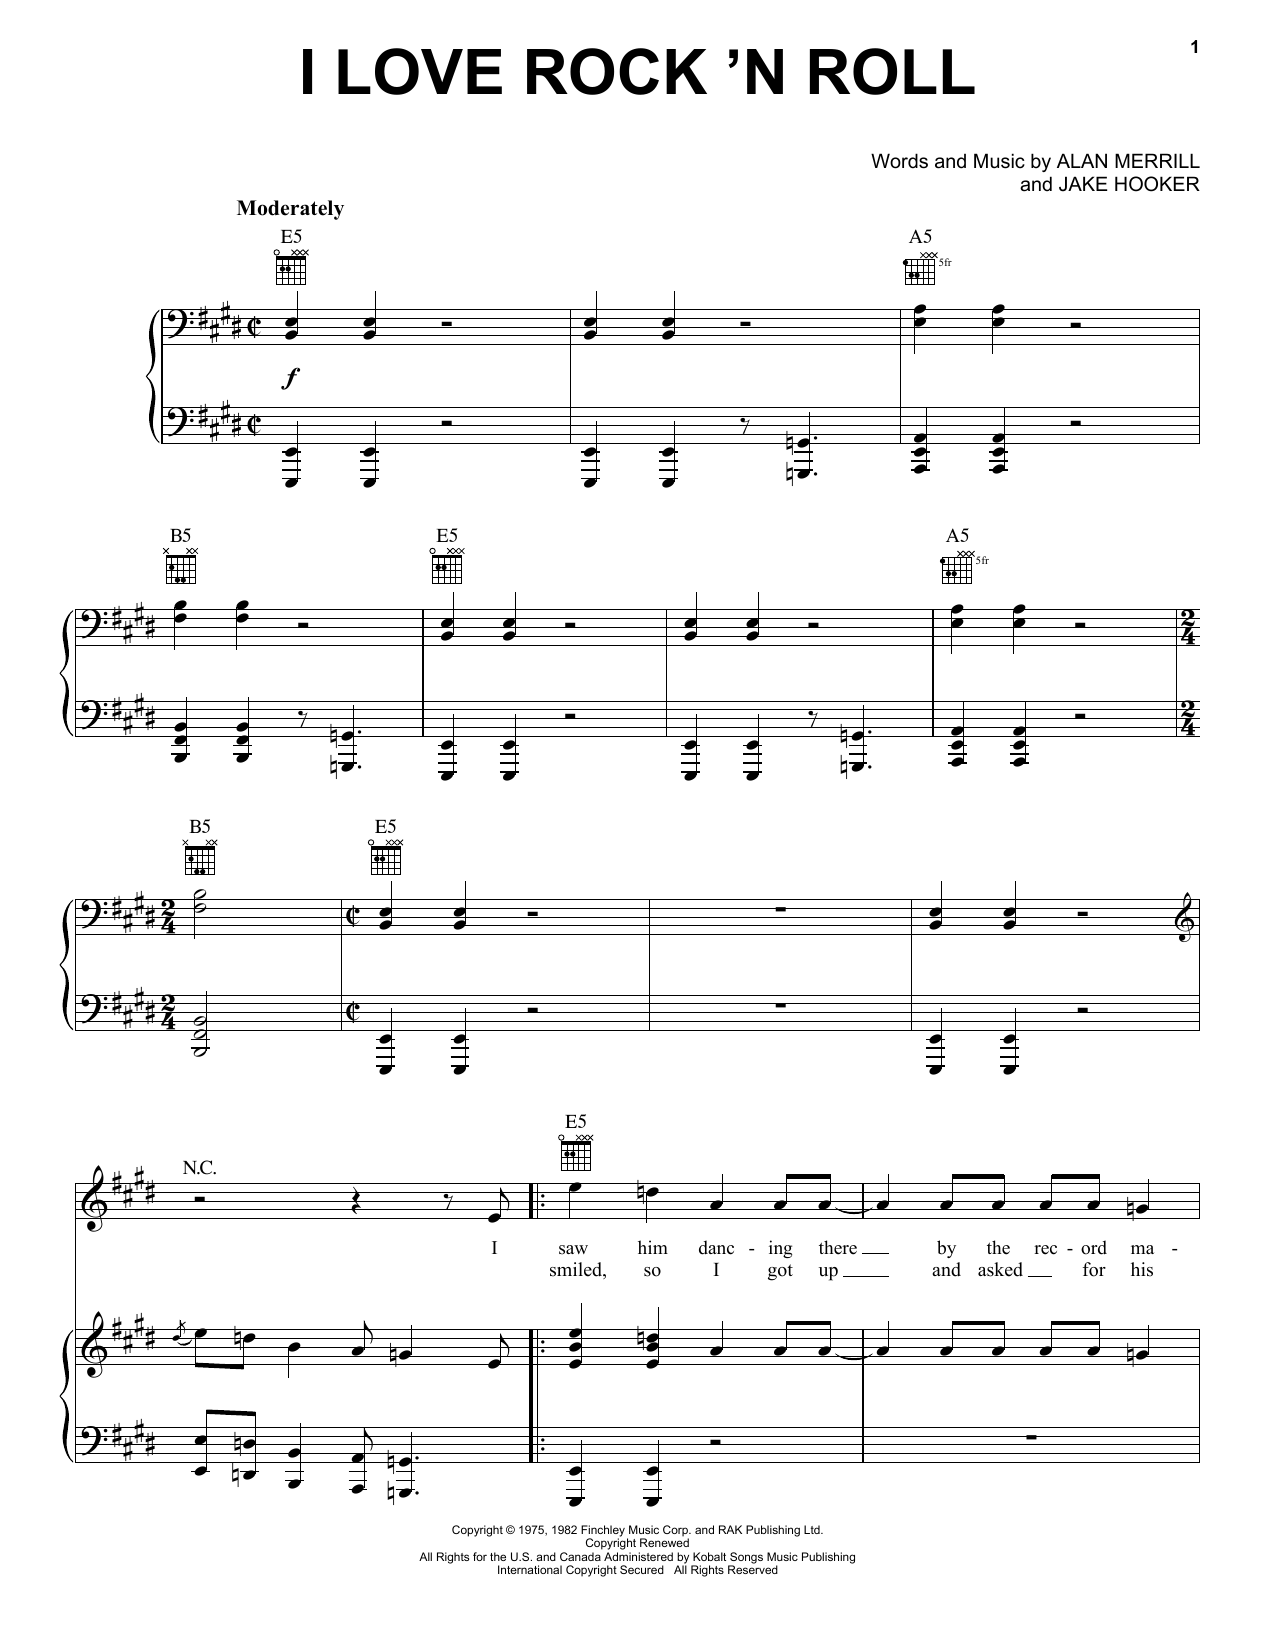 Download Joan Jett & The Blackhearts I Love Rock 'N Roll sheet music notes and chords for Piano, Vocal & Guitar (Right-Hand Melody) - Download Printable PDF and start playing in minutes.